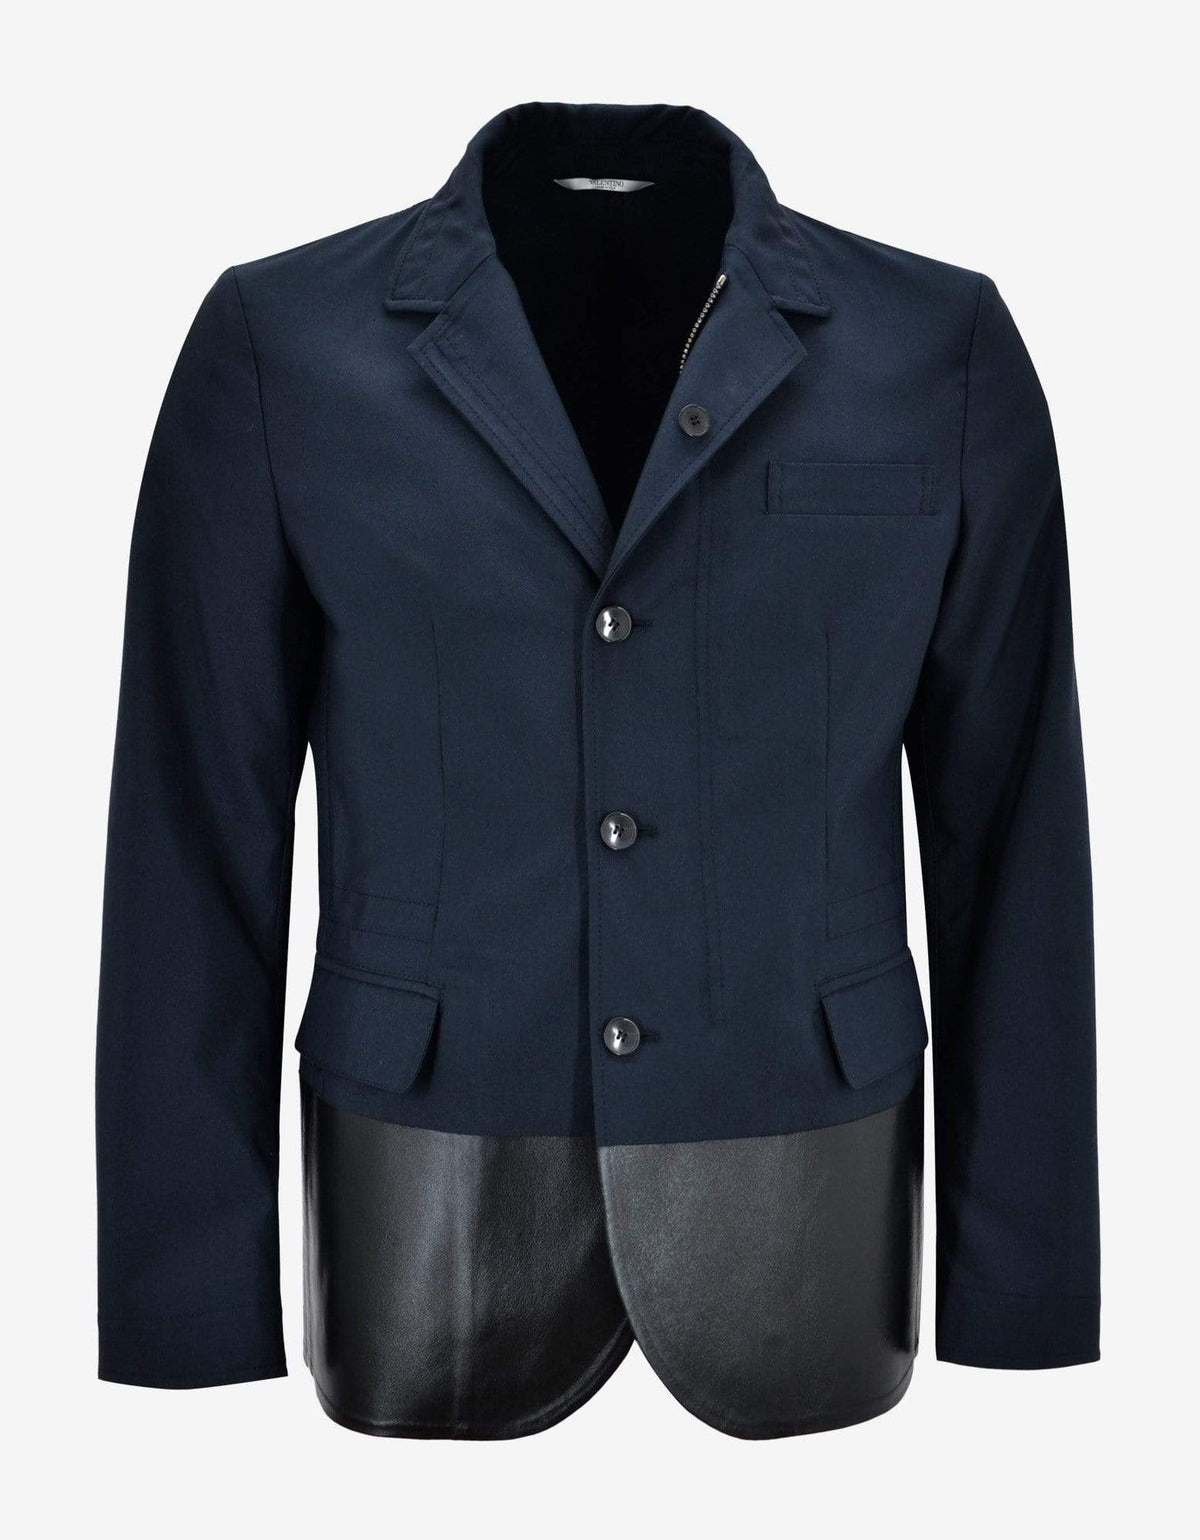 Valentino Navy Blue Jacket with Leather Panel